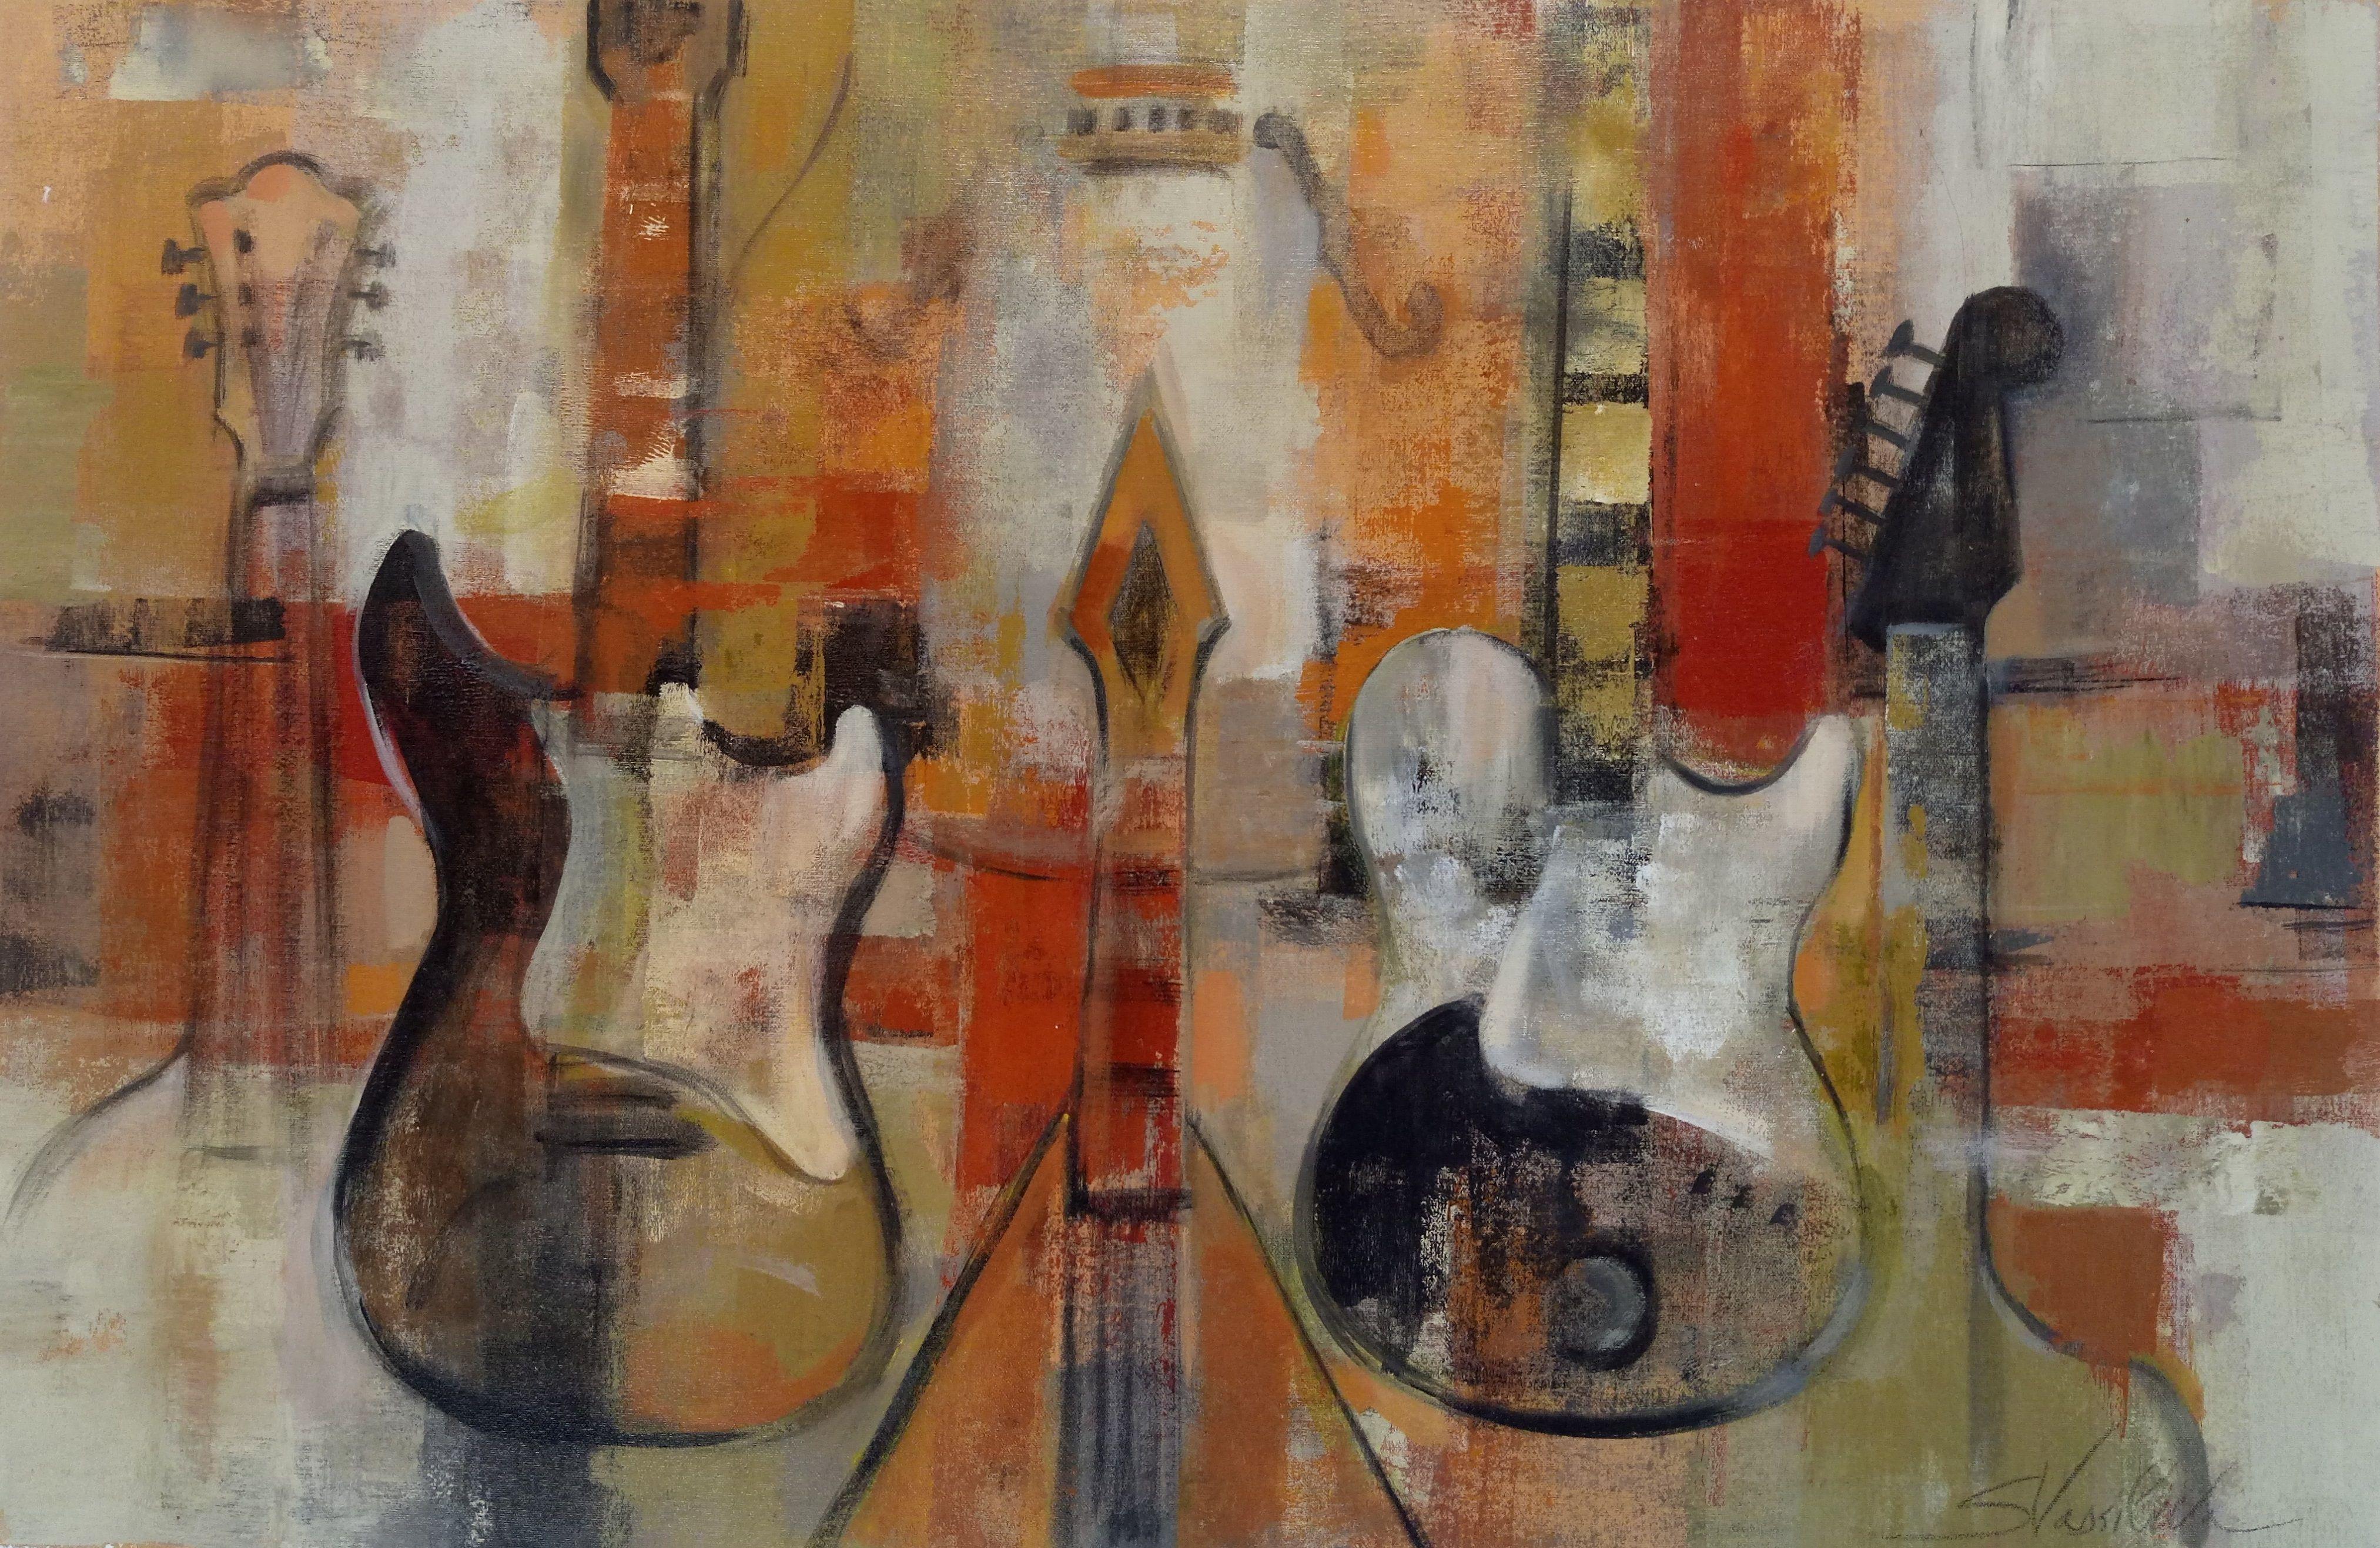 Large painting of musical instruments. Contemporary, abstracted and distressed. Painted on richly textured canvas with solid blocks of color. Geometric elements and musical symbols used in order to convey melody and rhythm. Youthful, modern yet